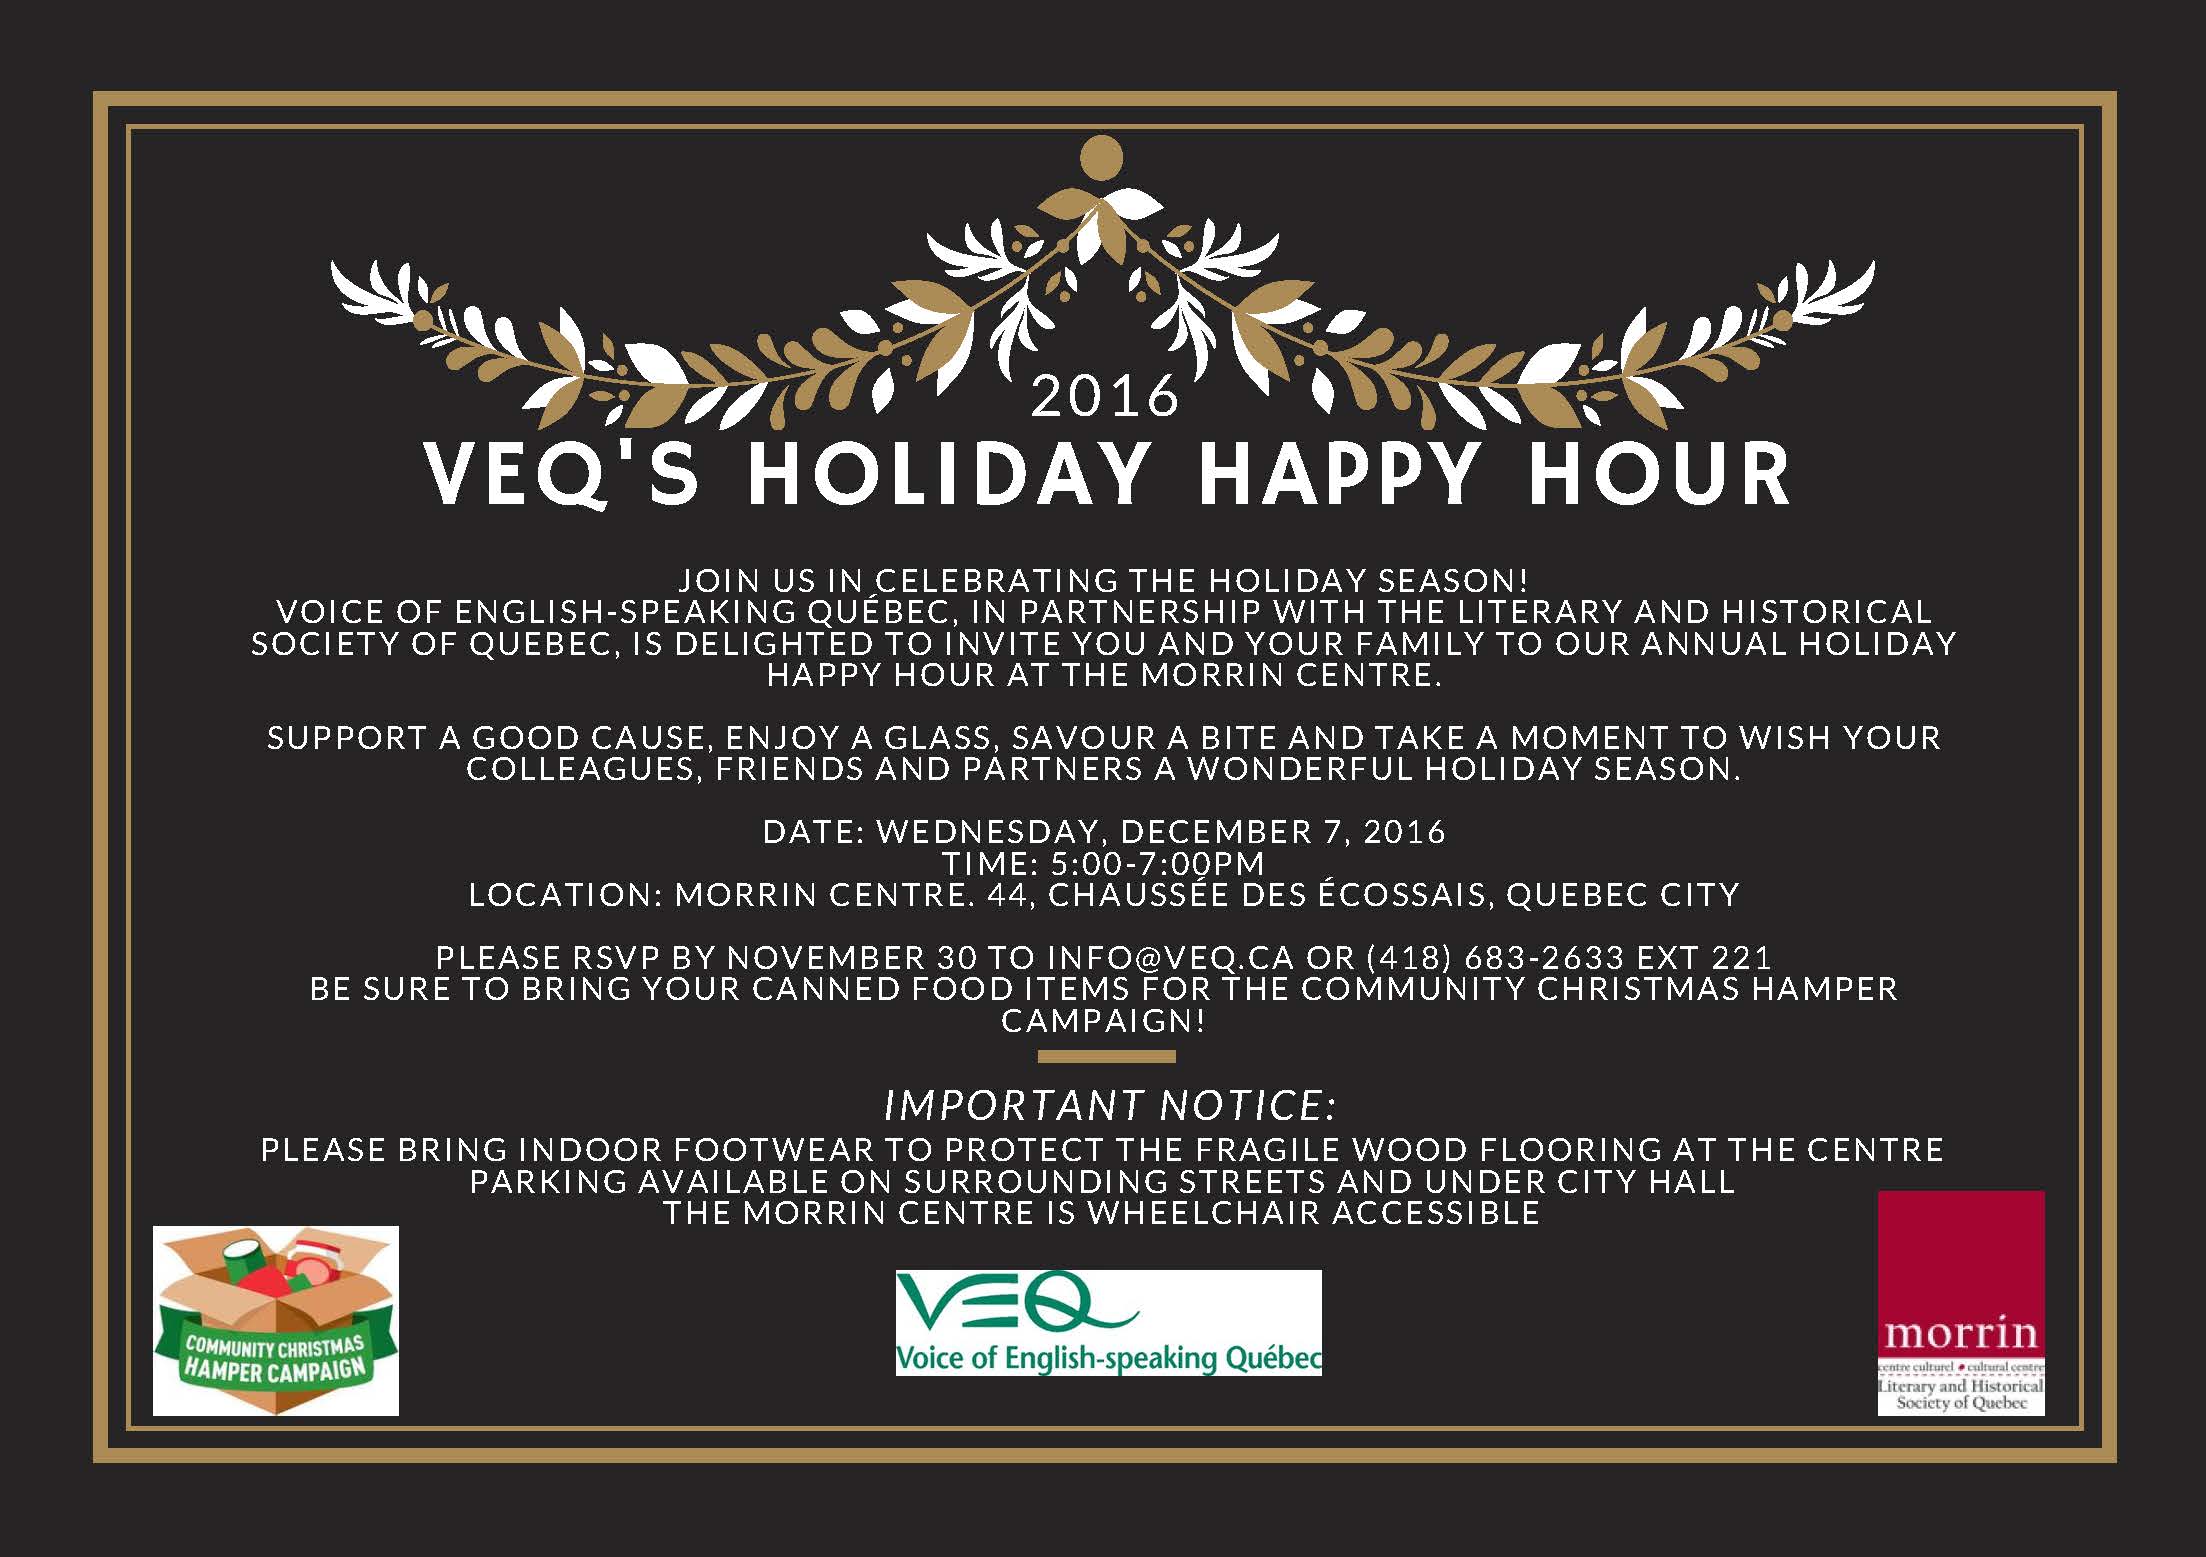 VEQ's Annual Holiday Happy Hour